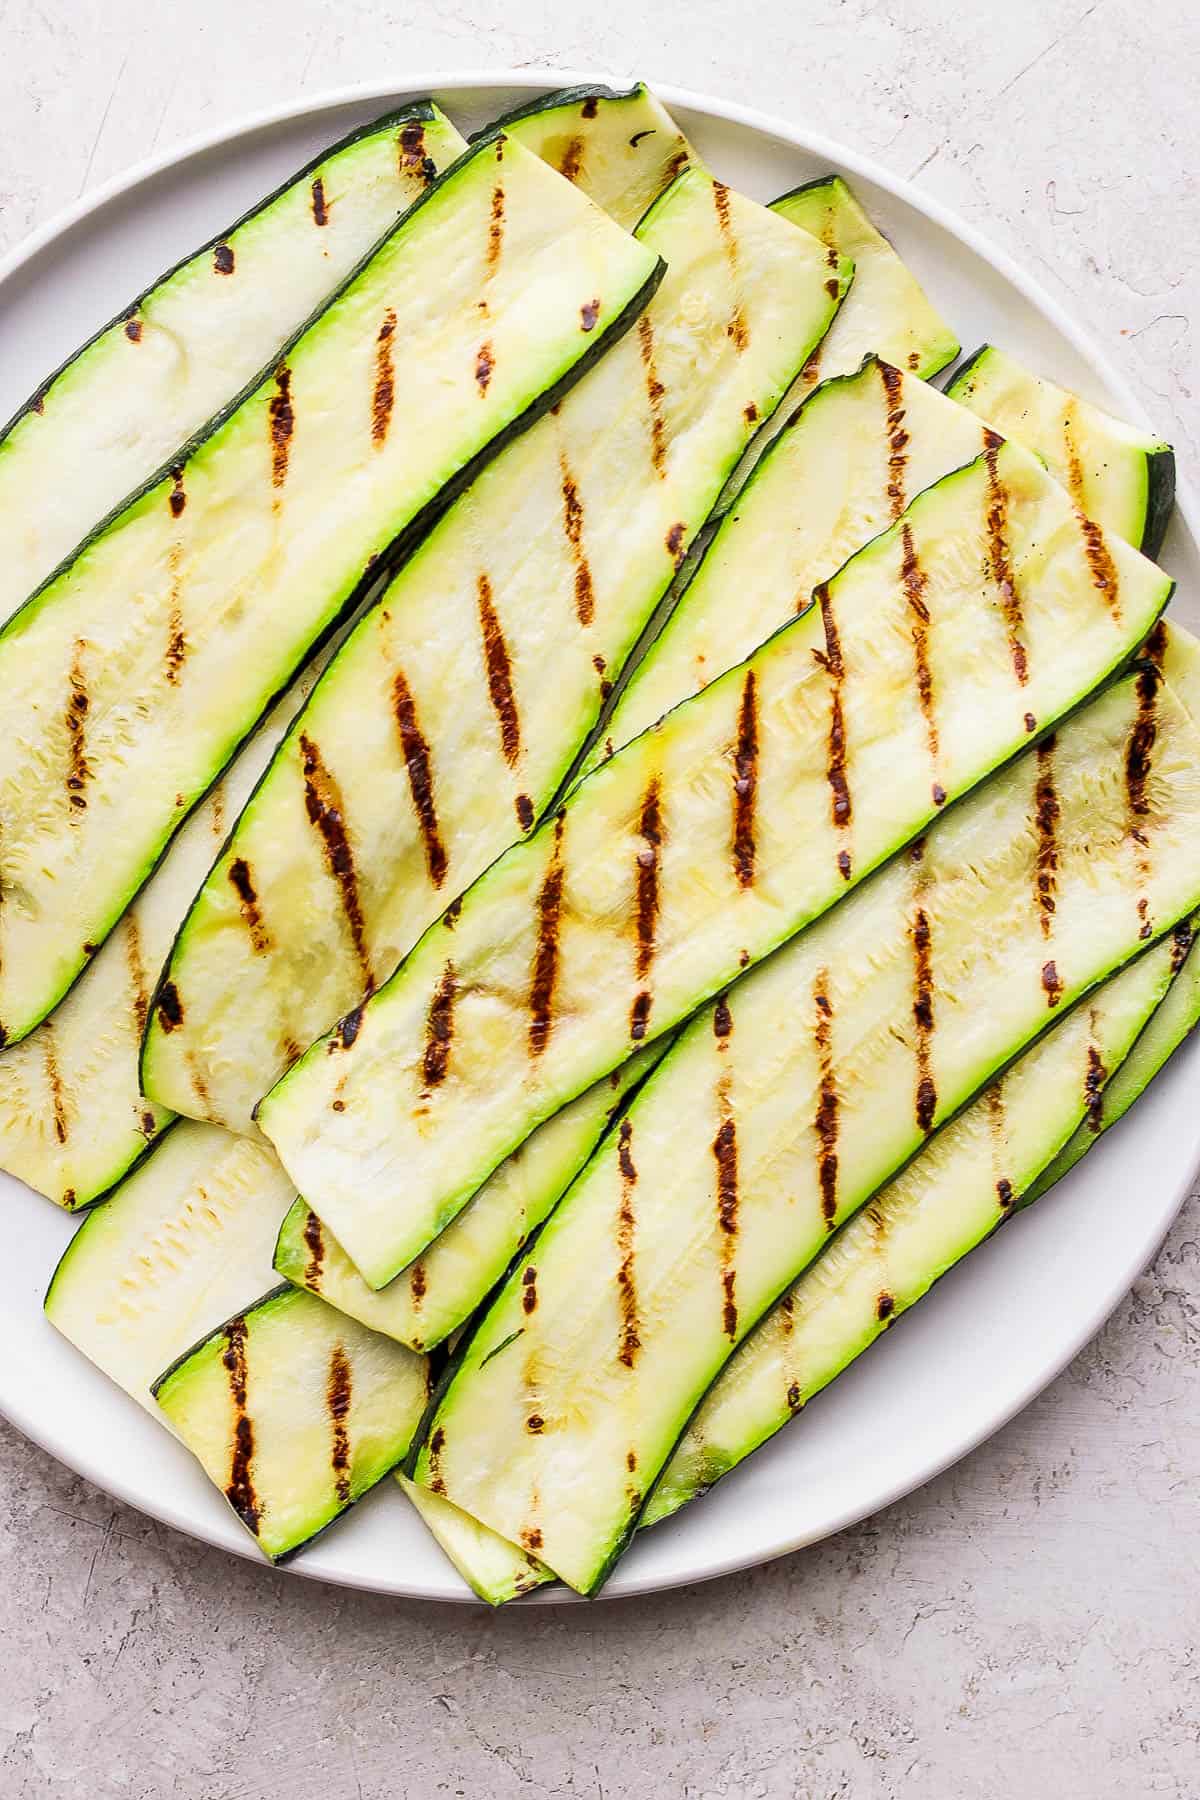 Perfectly grilled slabs of zucchini on a white plate.